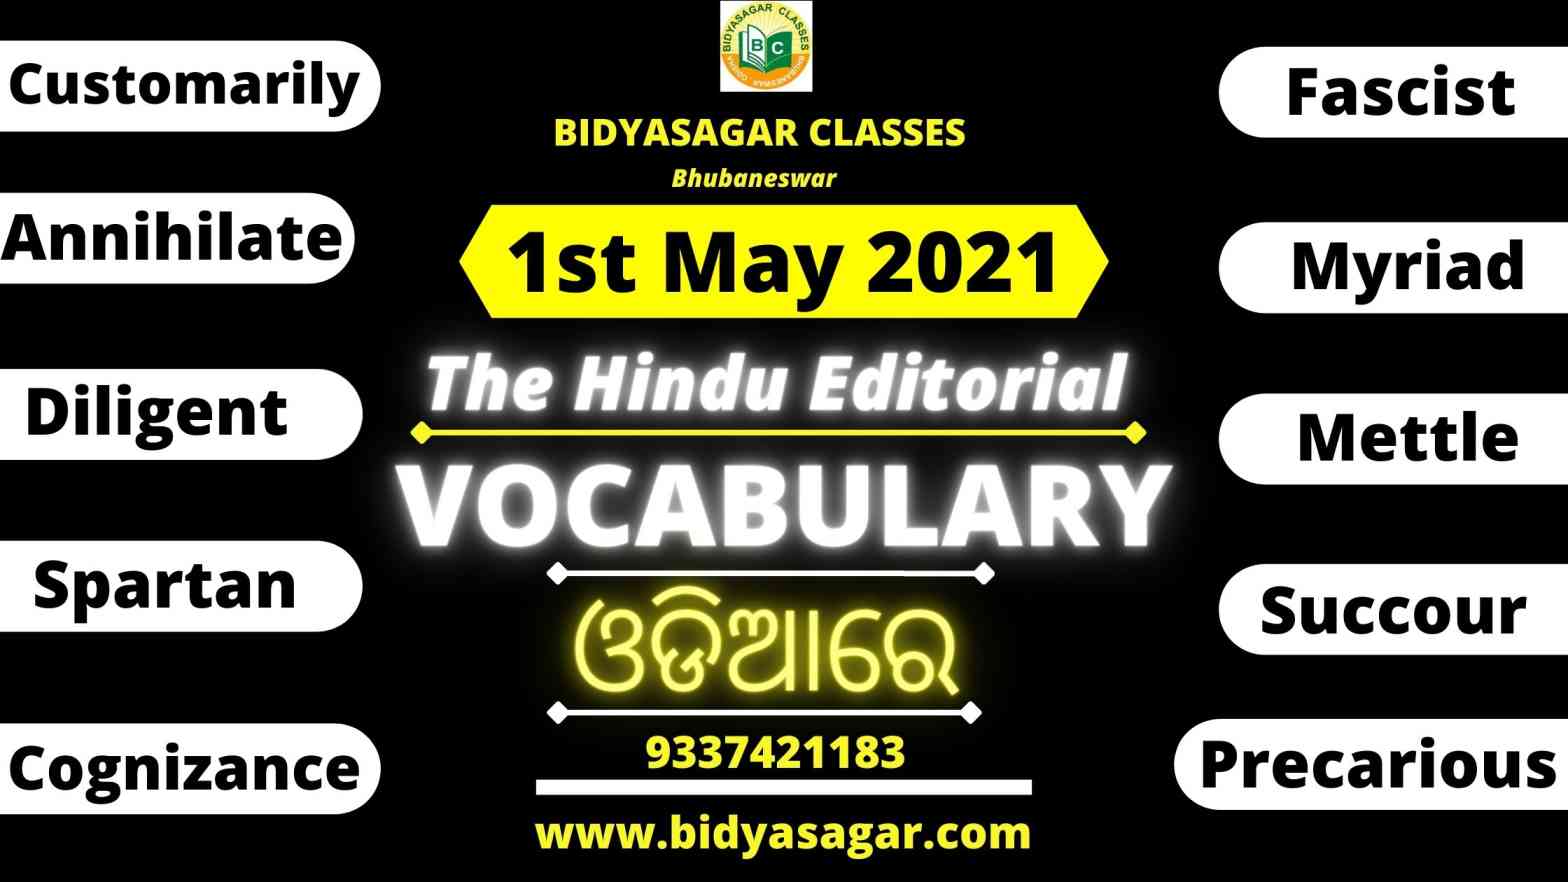 The Hindu Editorial Vocabulary of 1st May 2021